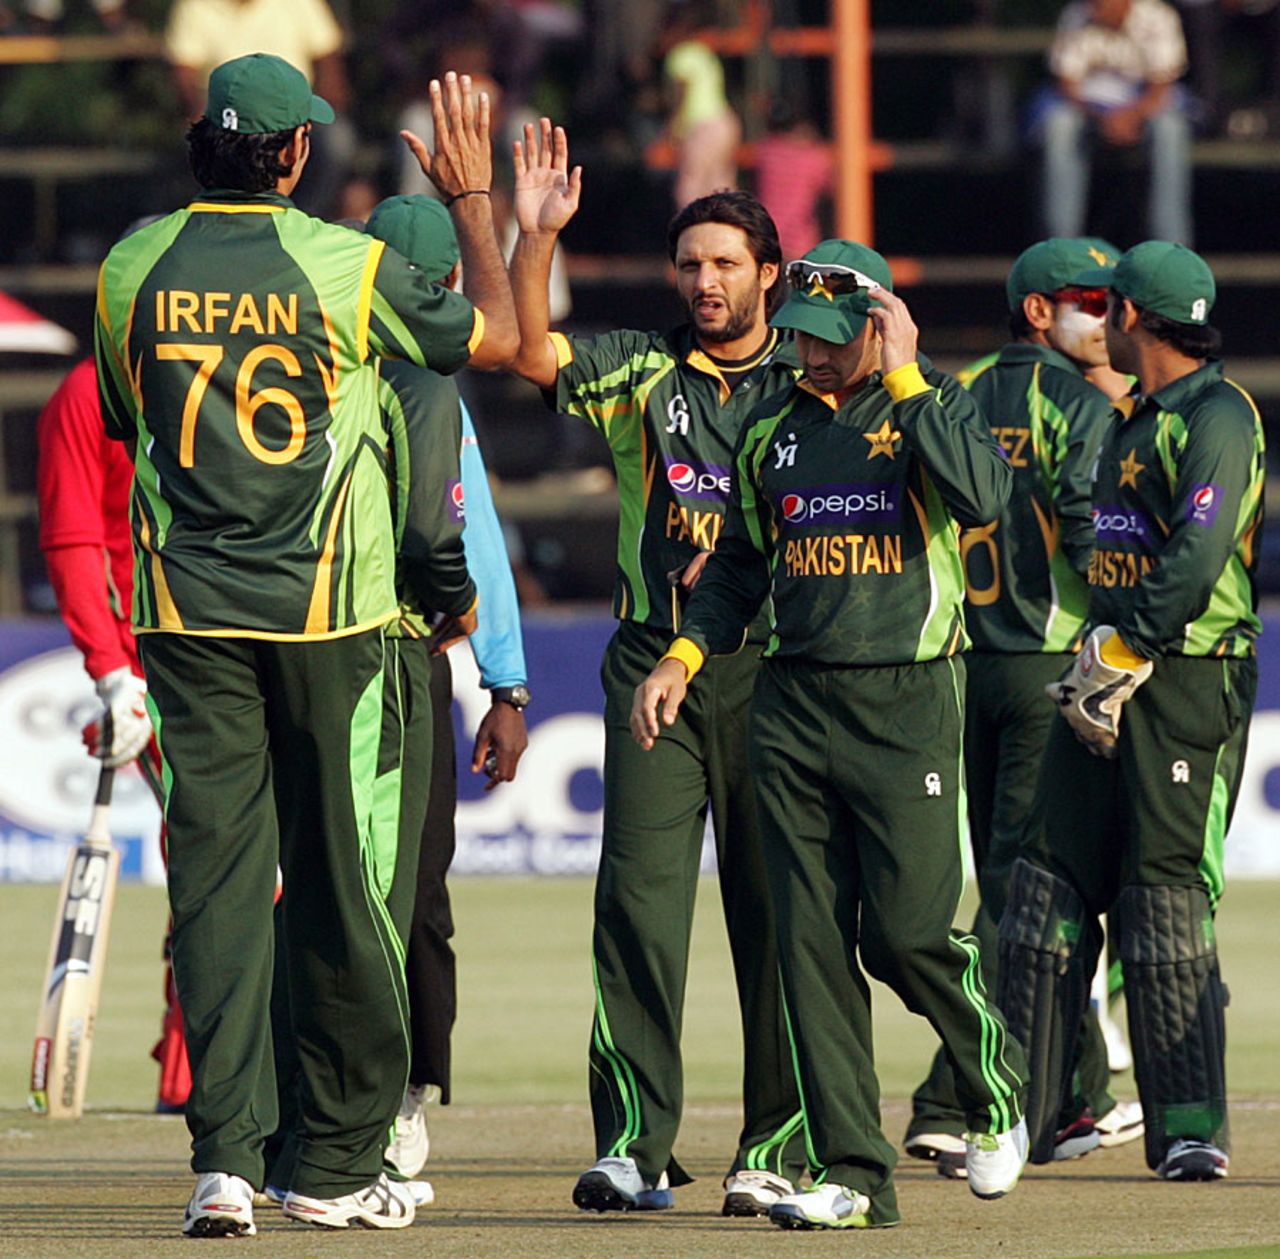 Shahid Afridi and his team-mates celebrate a wicket, Zimbabwe v Pakistan, 1st T20, Harare, August 23, 2013